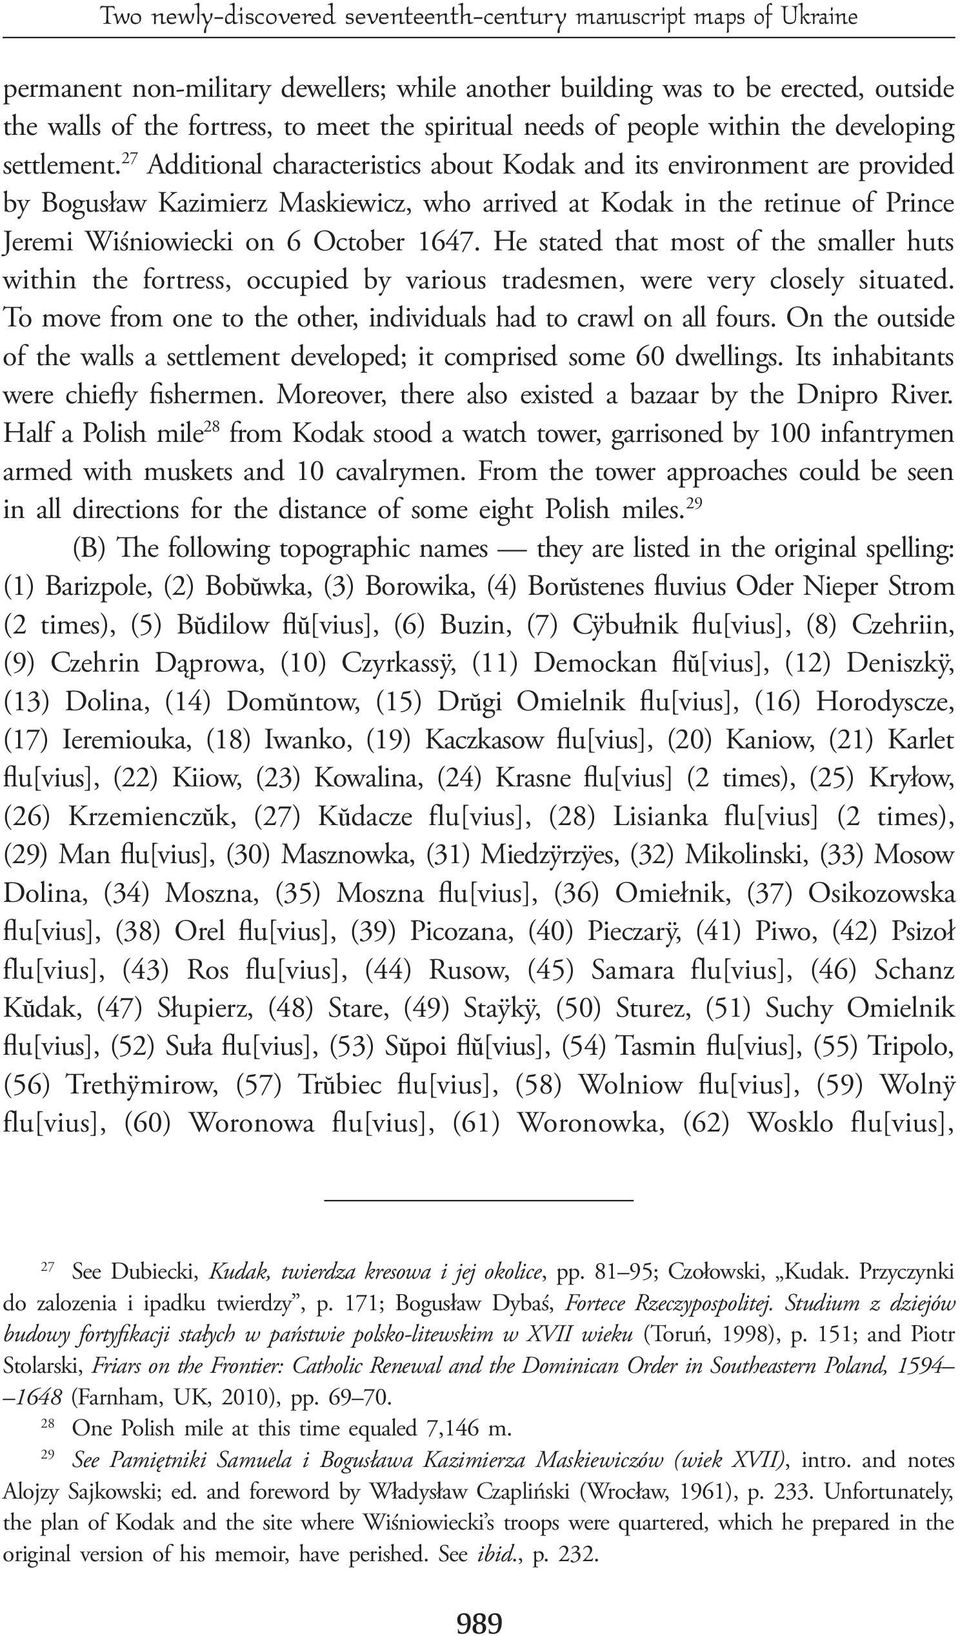 27 Additional characteristics about Kodak and its environment are provided by Bogusław Kazimierz Maskiewicz, who arrived at Kodak in the retinue of Prince Jeremi Wiśniowiecki on 6 October 1647.